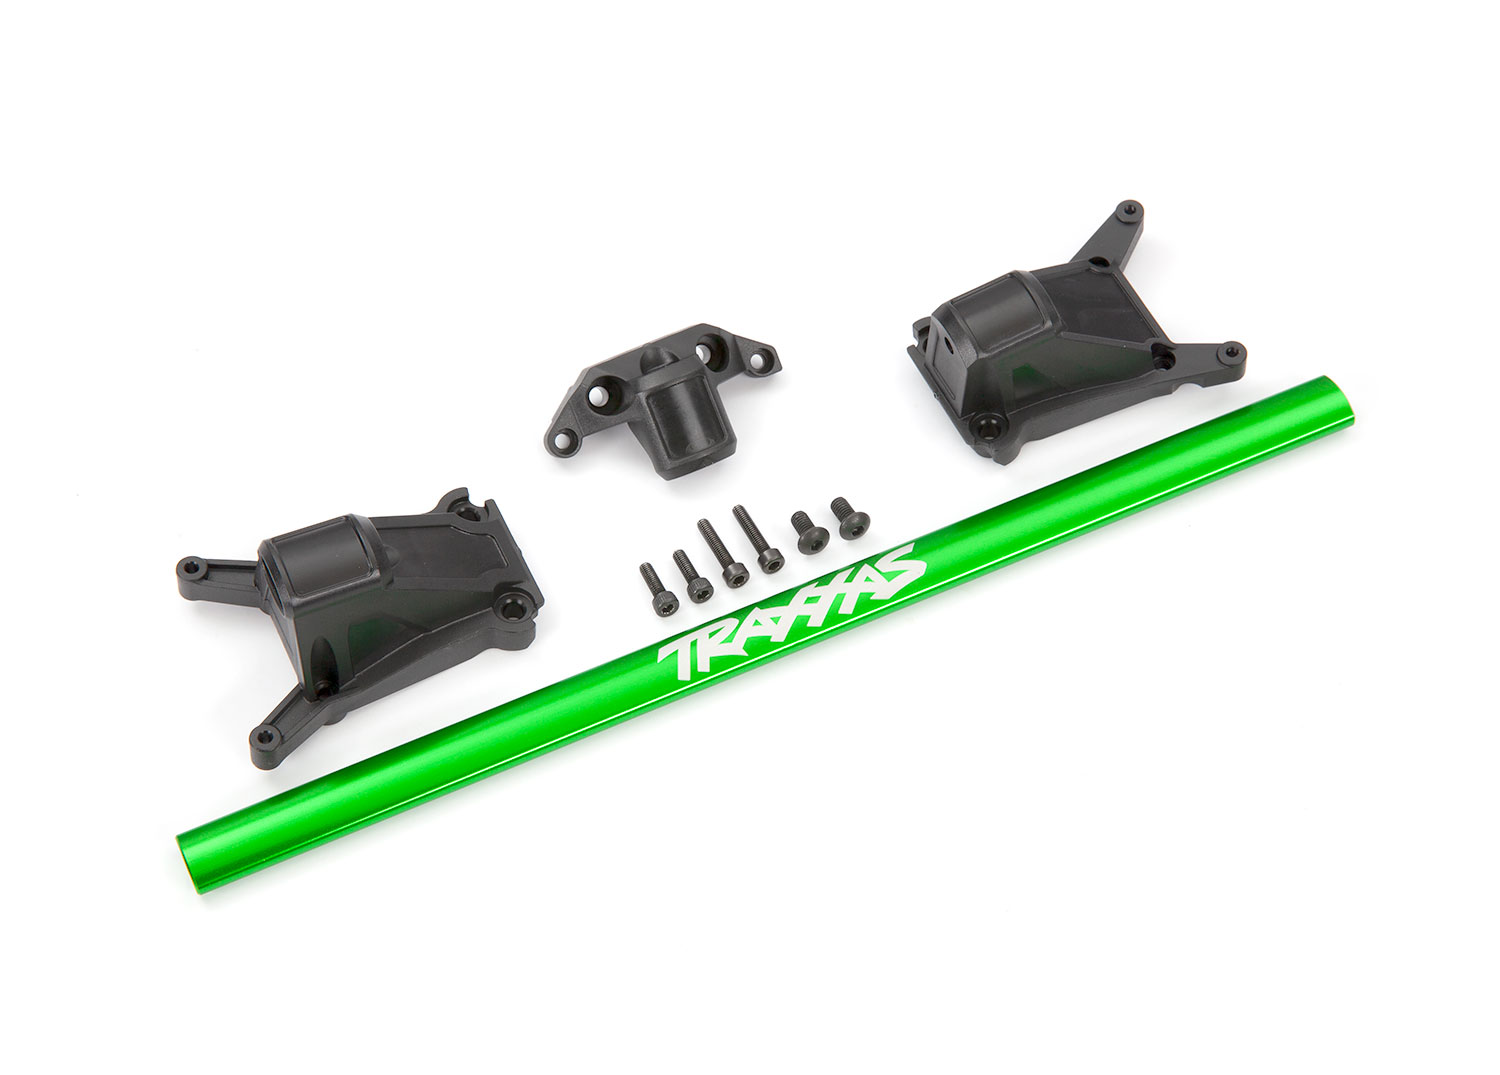 Chassis brace kit, green (fits Rustler 4X4 and Slash 4X4 equipped with Low-CG chassis) (TRX-6730G)